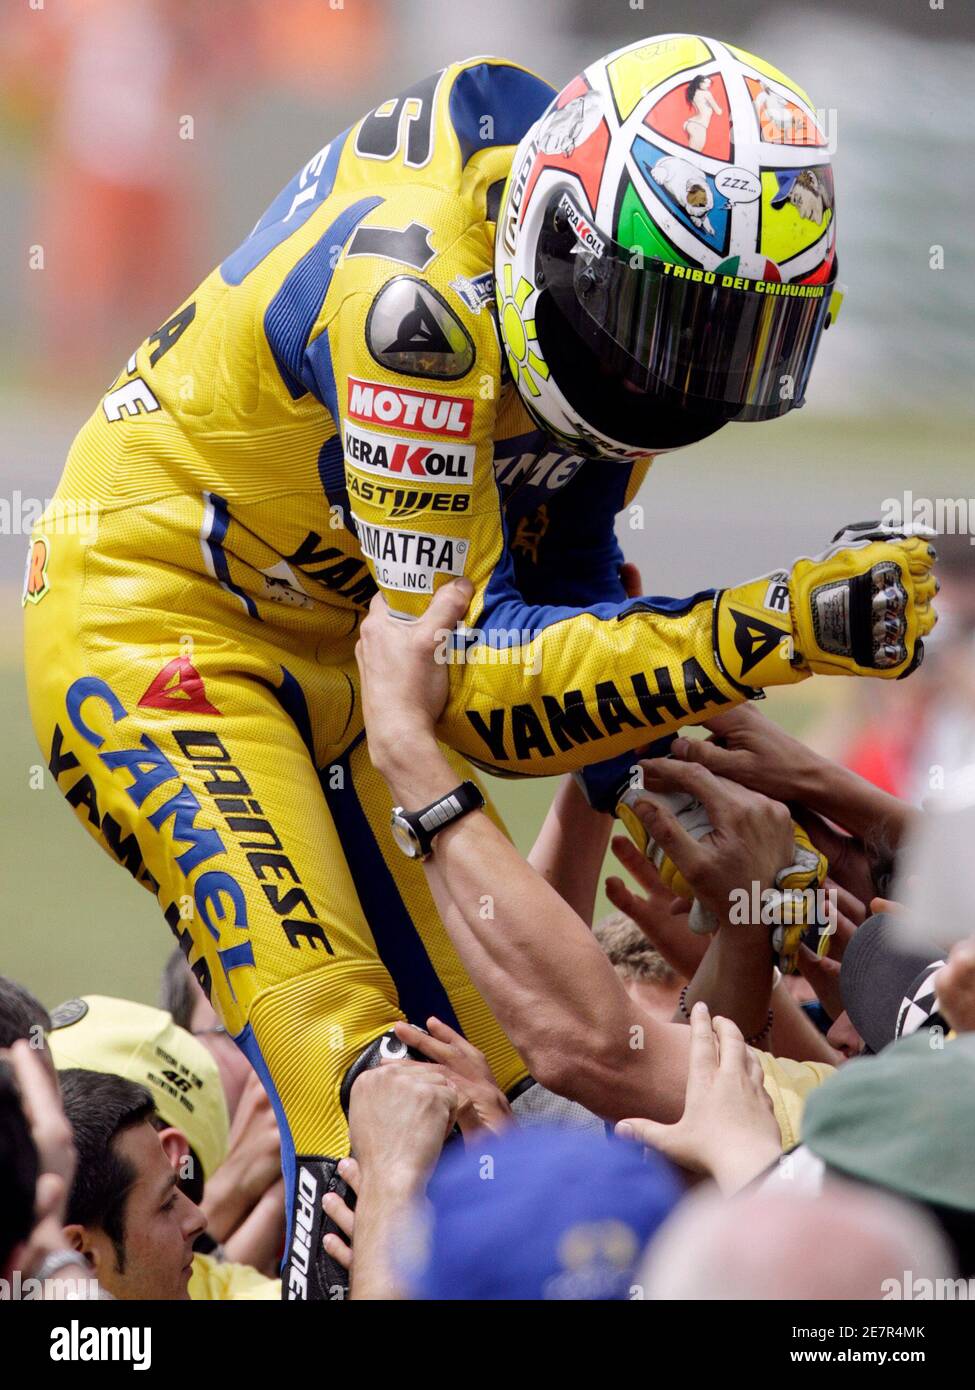 Yamaha MotoGP rider Valentino Rossi of Italy celebrates with fans after winning the Italian Motorcycling Prix on circuit central Italy June 4, 2006. REUTERS/Chris Helgren (ITALY Stock Photo - Alamy